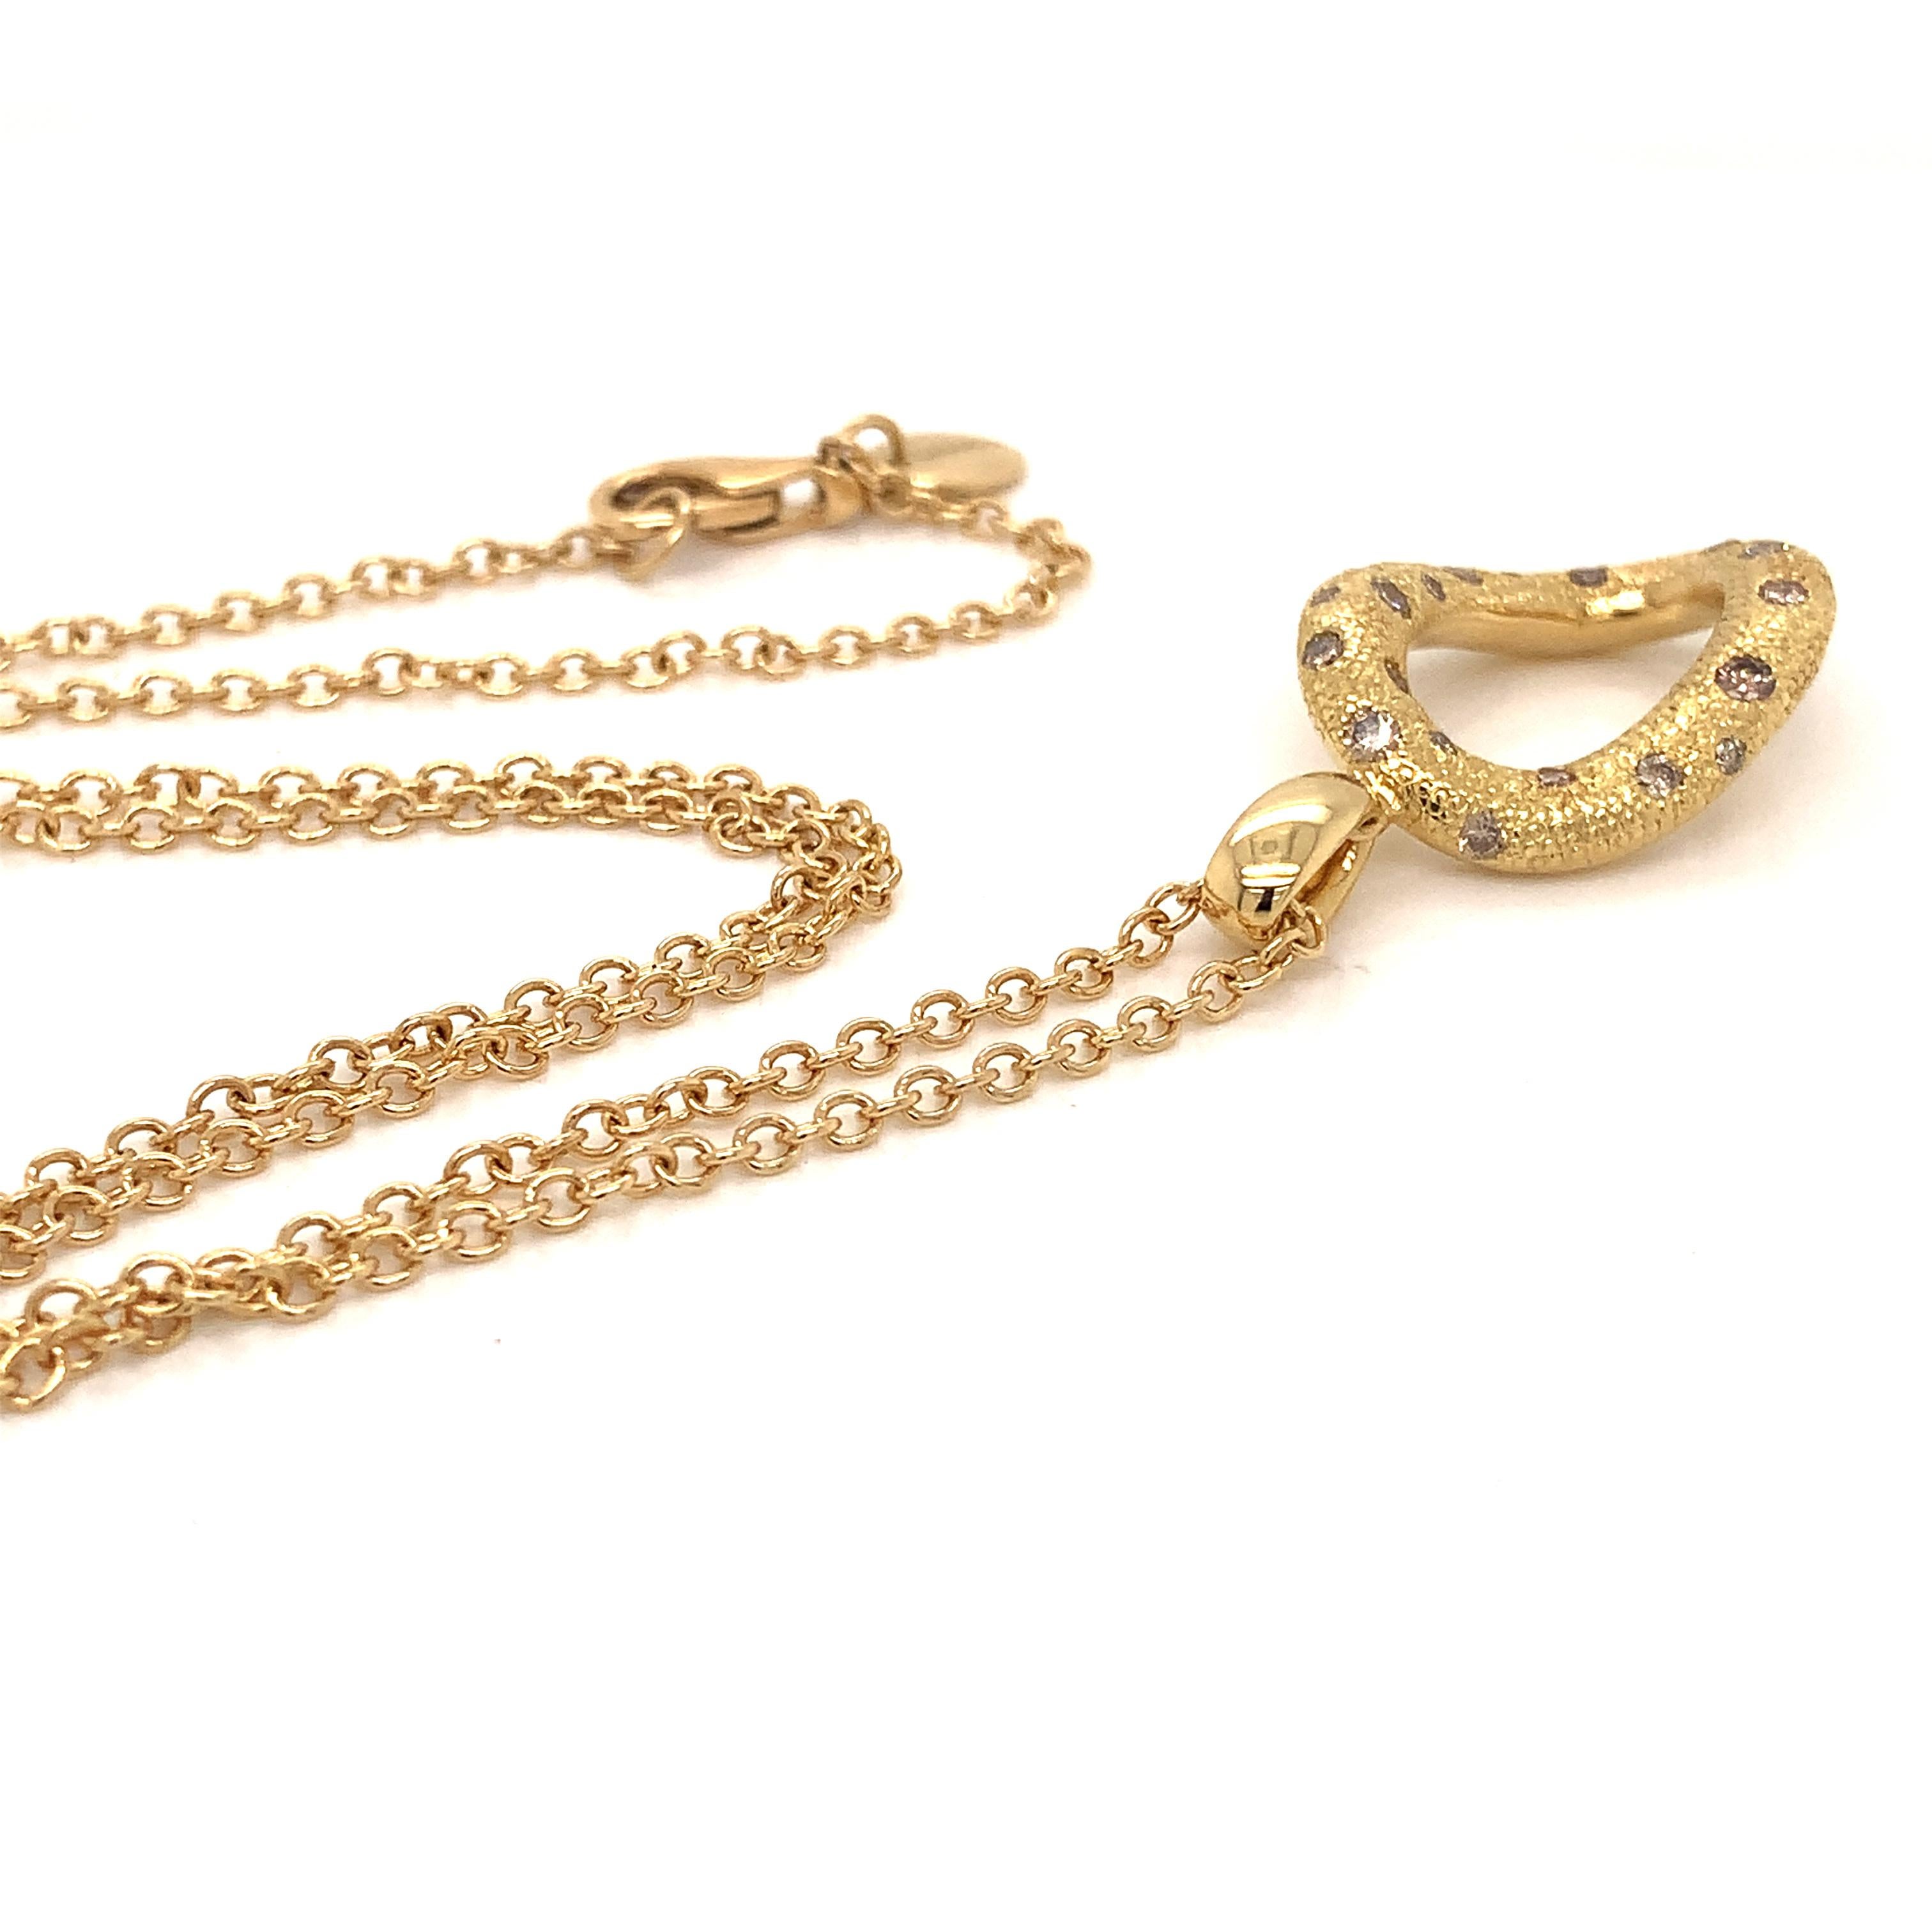 18 Karat Yellow Gold Brown Diamonds  GARAVELLI Pendant with chain  , set in an artisanal scattered way, with hand hammered gold surface among the brown diamonds. Matching earrings also available. 
Total Pendant Lenght 30 mm ( including the bale); 